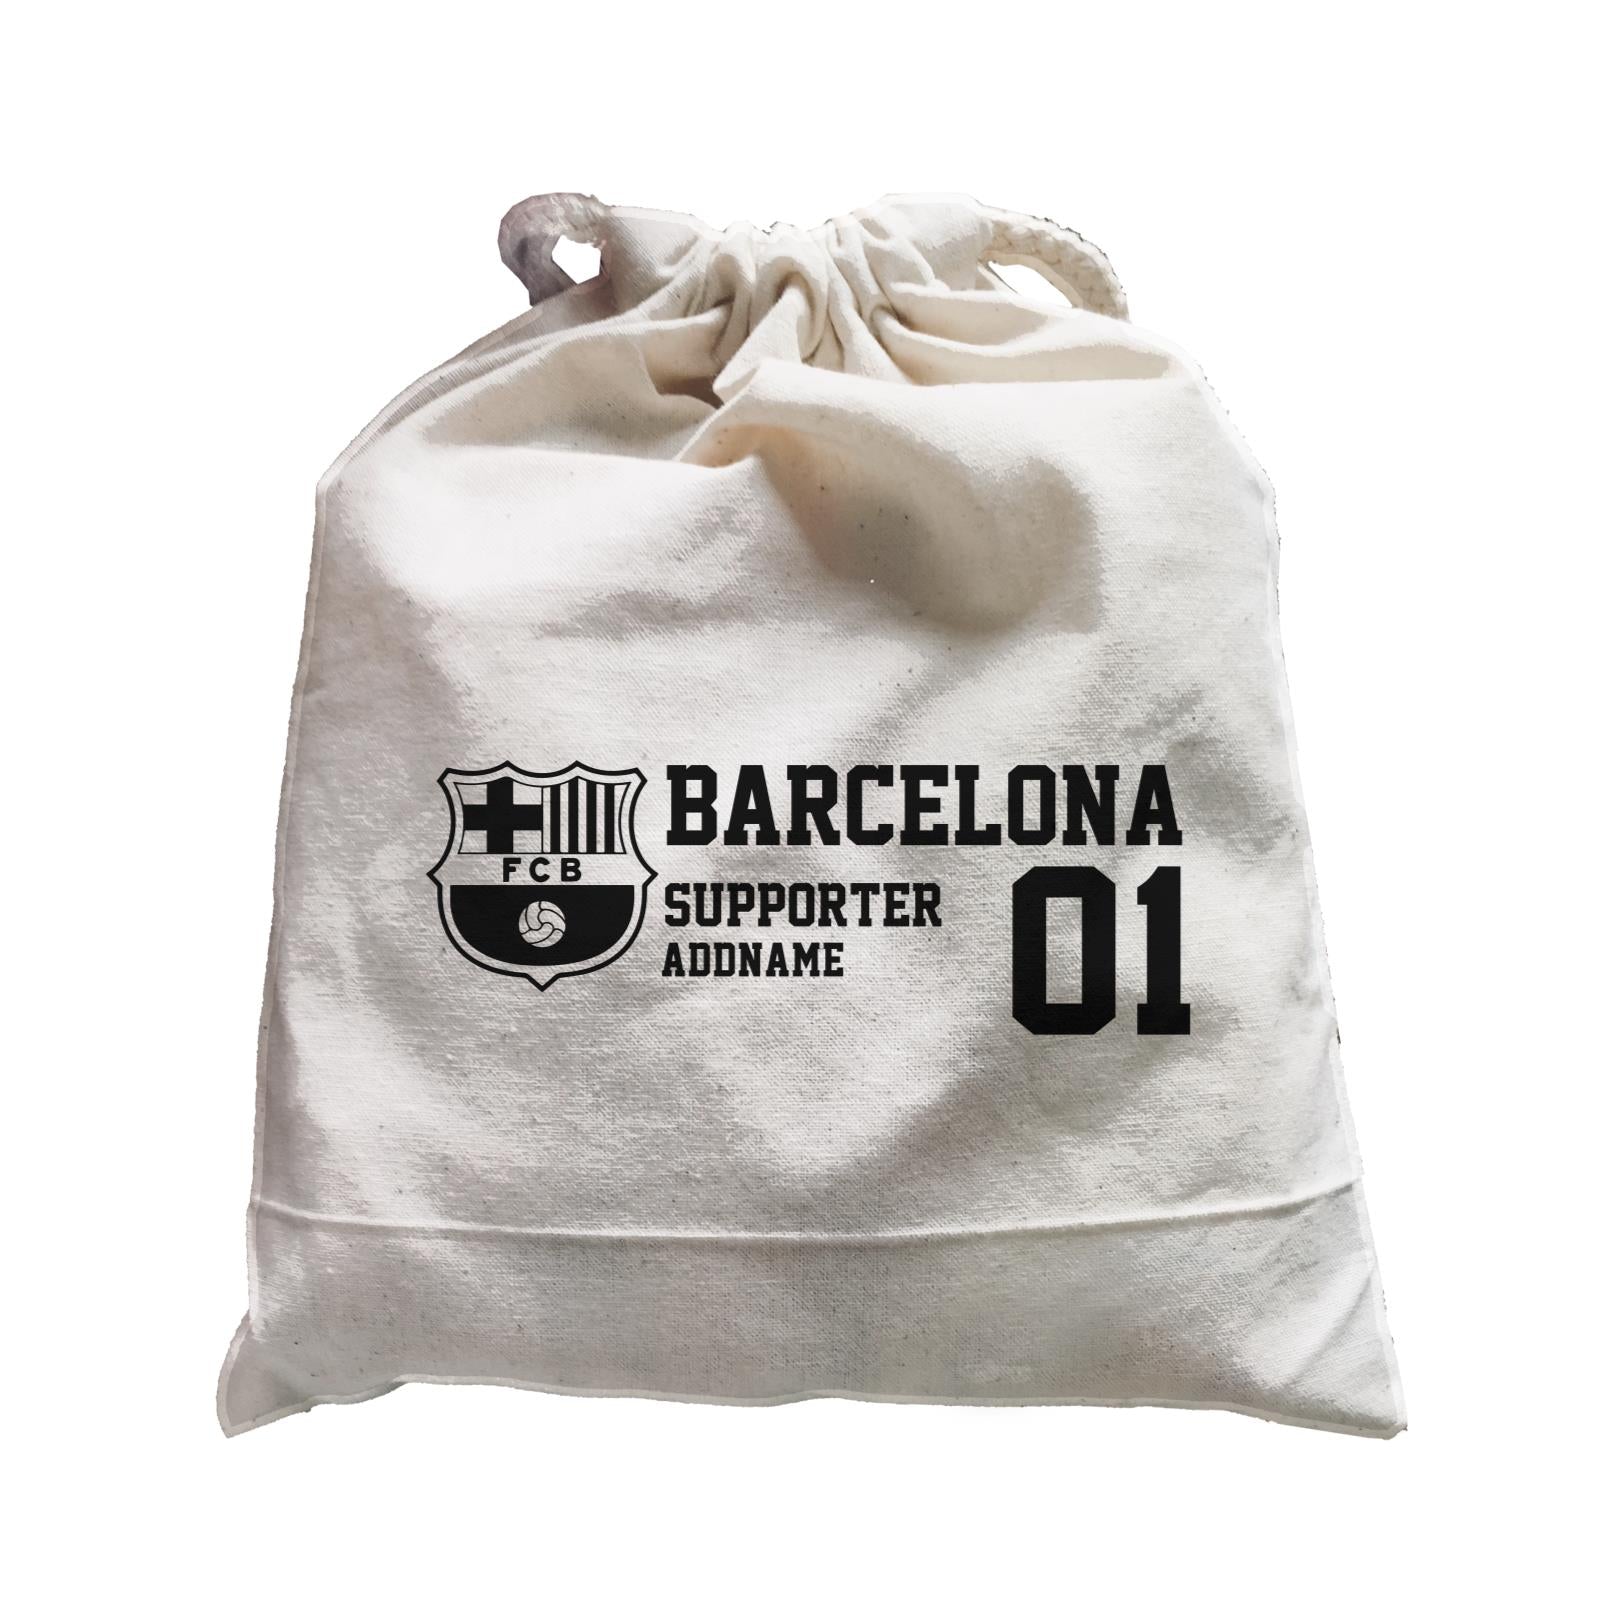 Barcelona Football Logo Supporter Accessories Addname Satchel